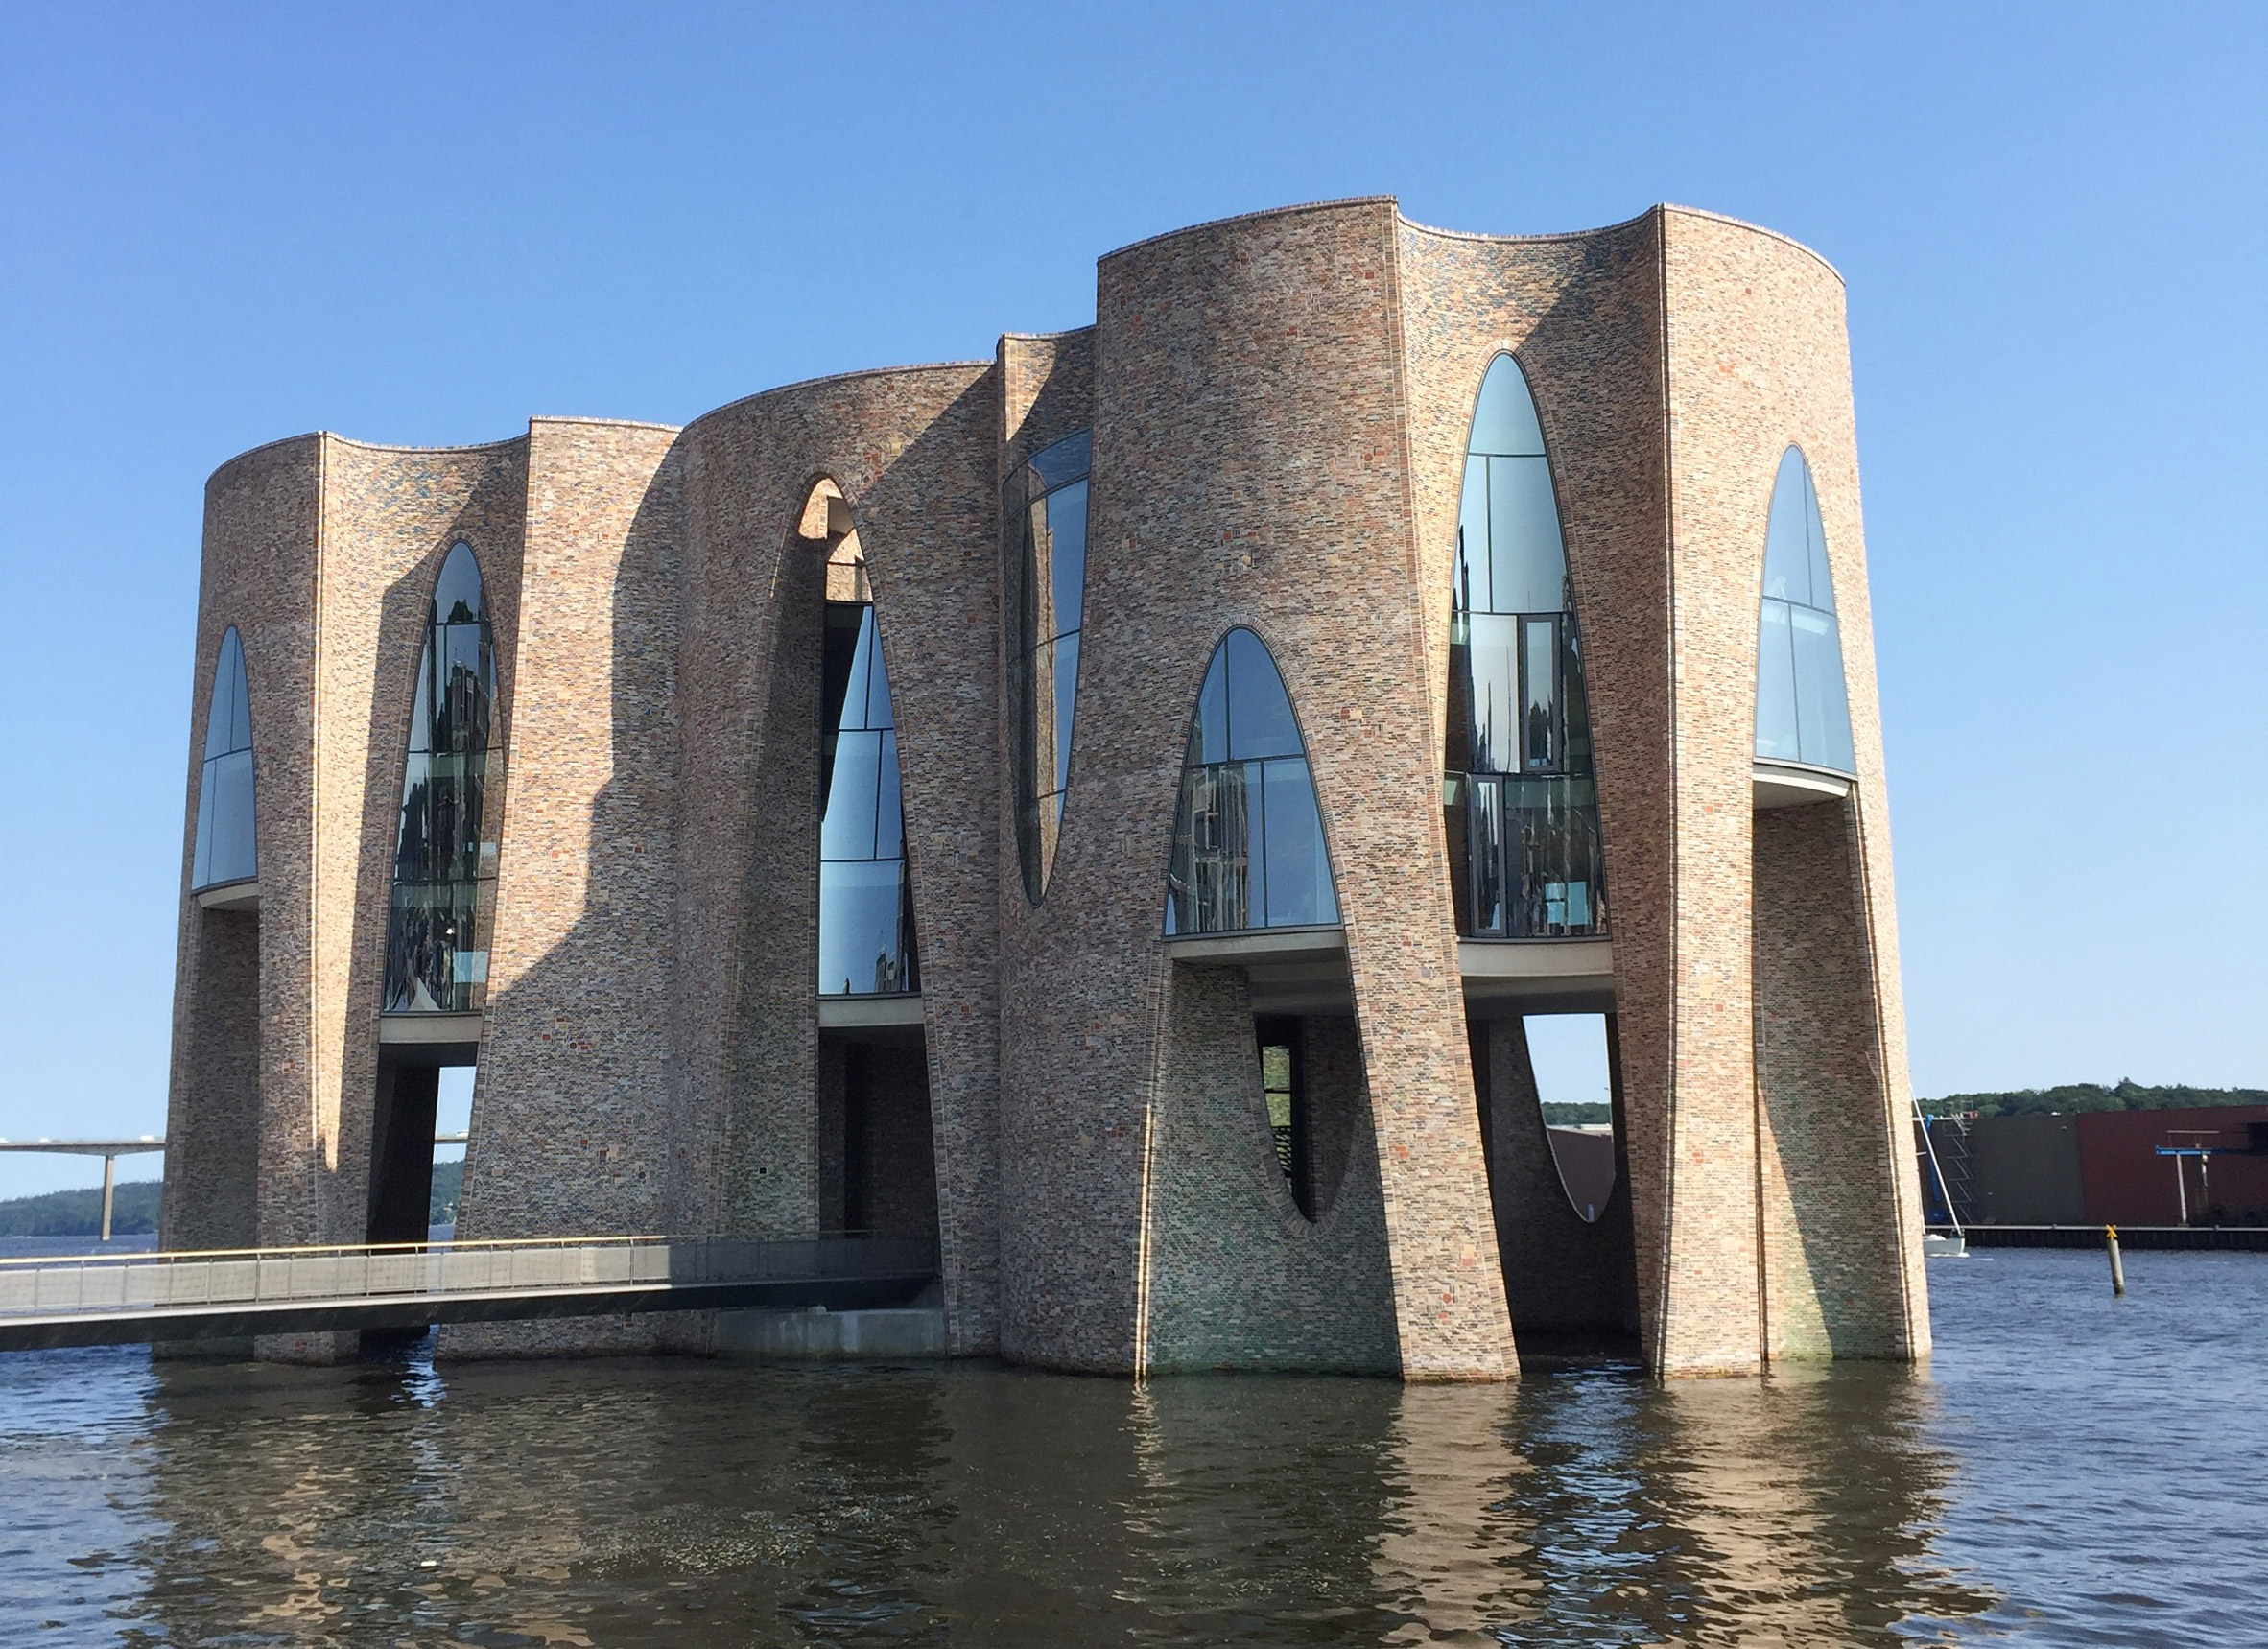 Måge rustfri supplere Olafur Eliasson's first building is a castle-like office in a Danish fjord